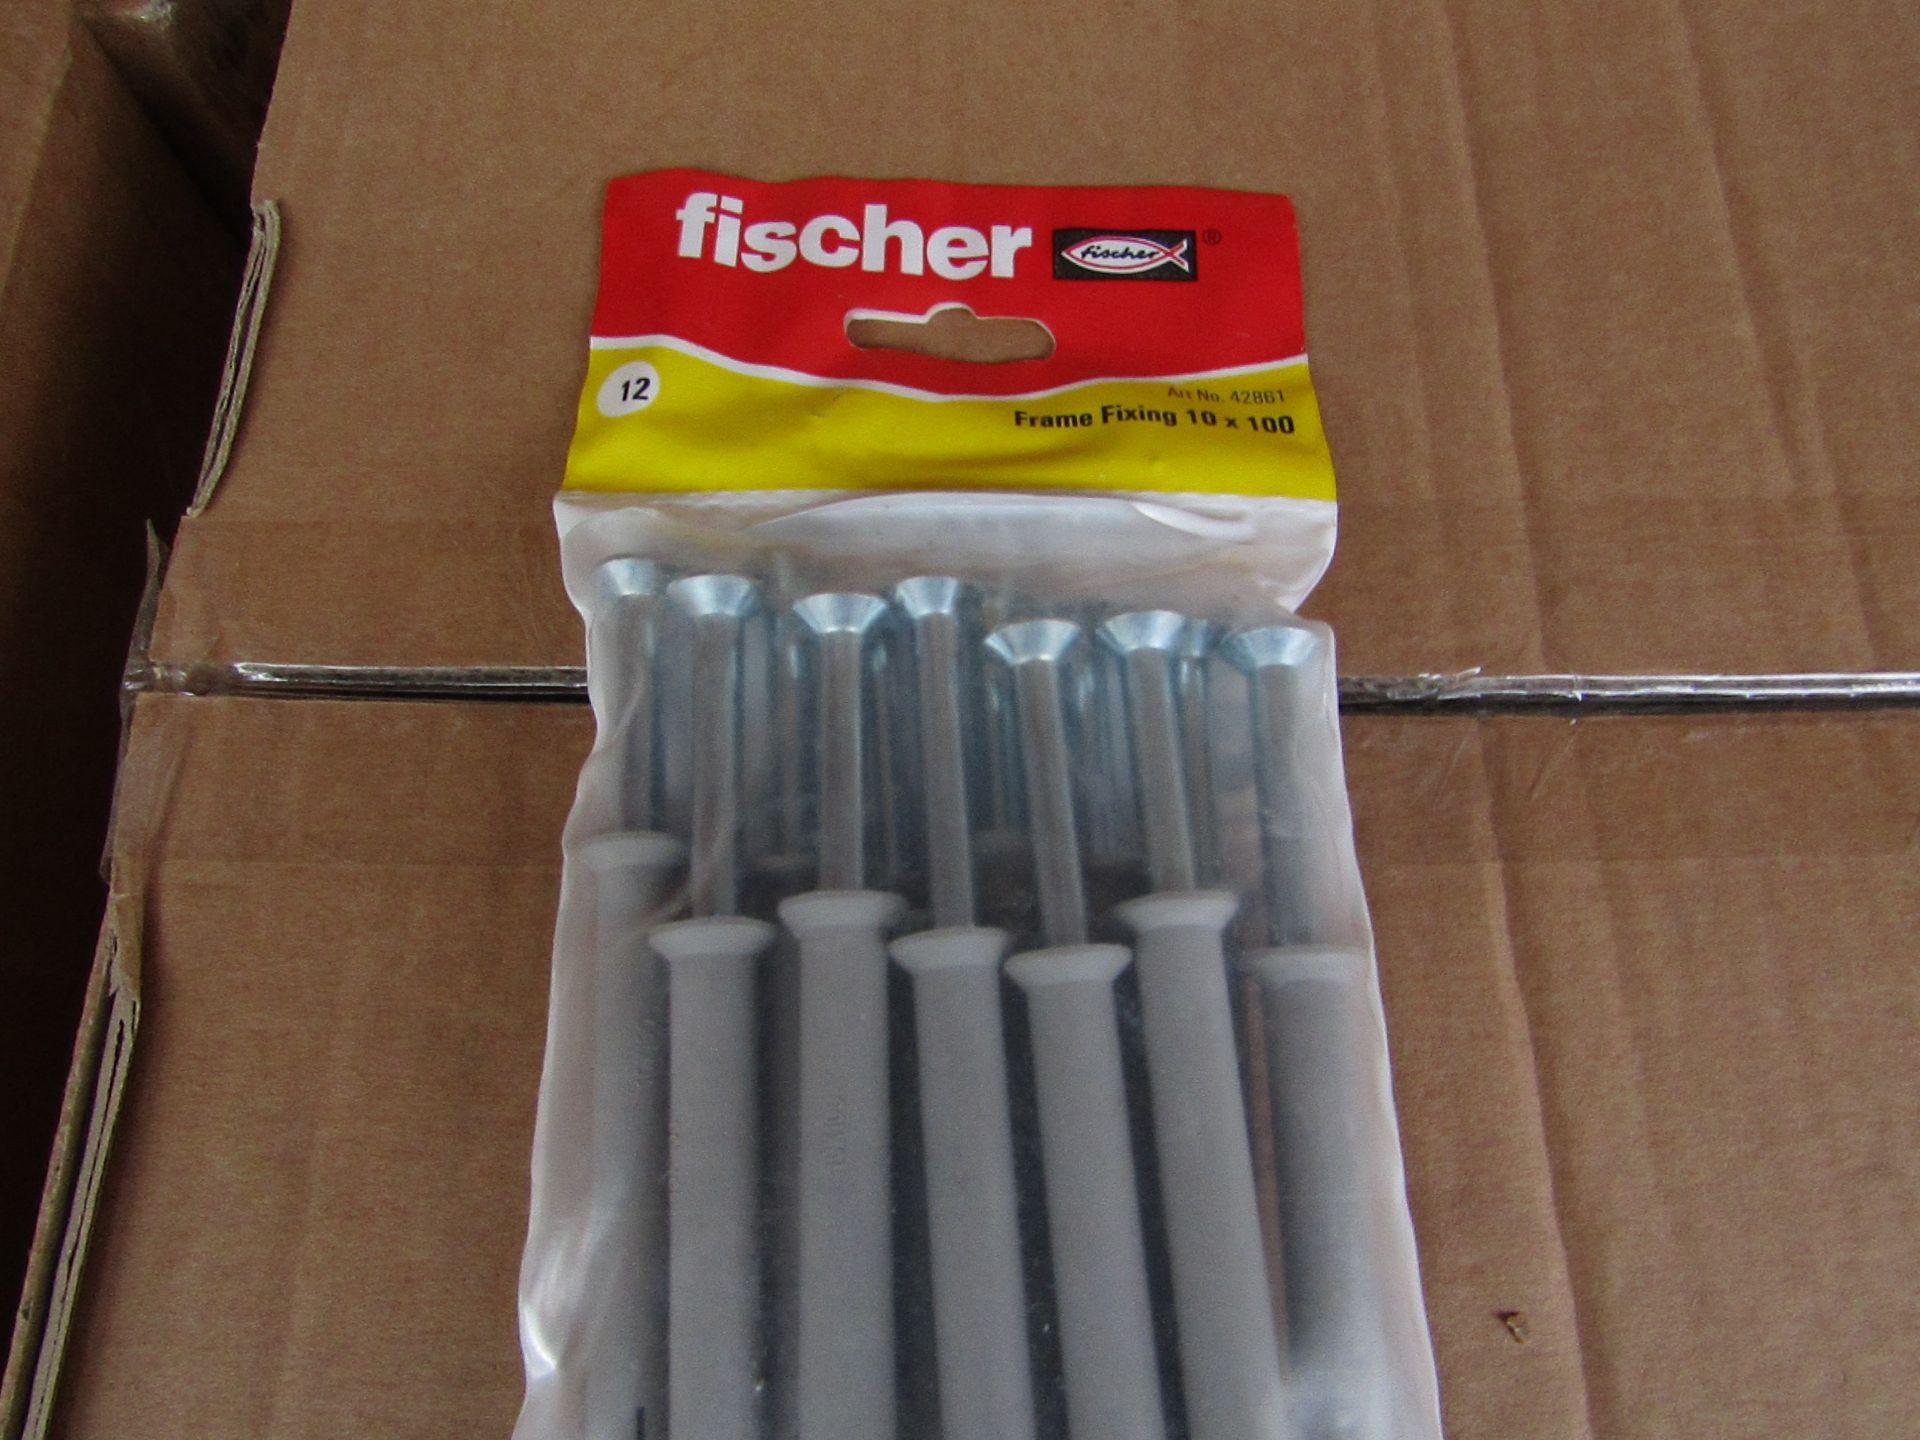 5x Fischer - Frame Fixing 8 x 100 (Packs of 12) - New & Packaged.